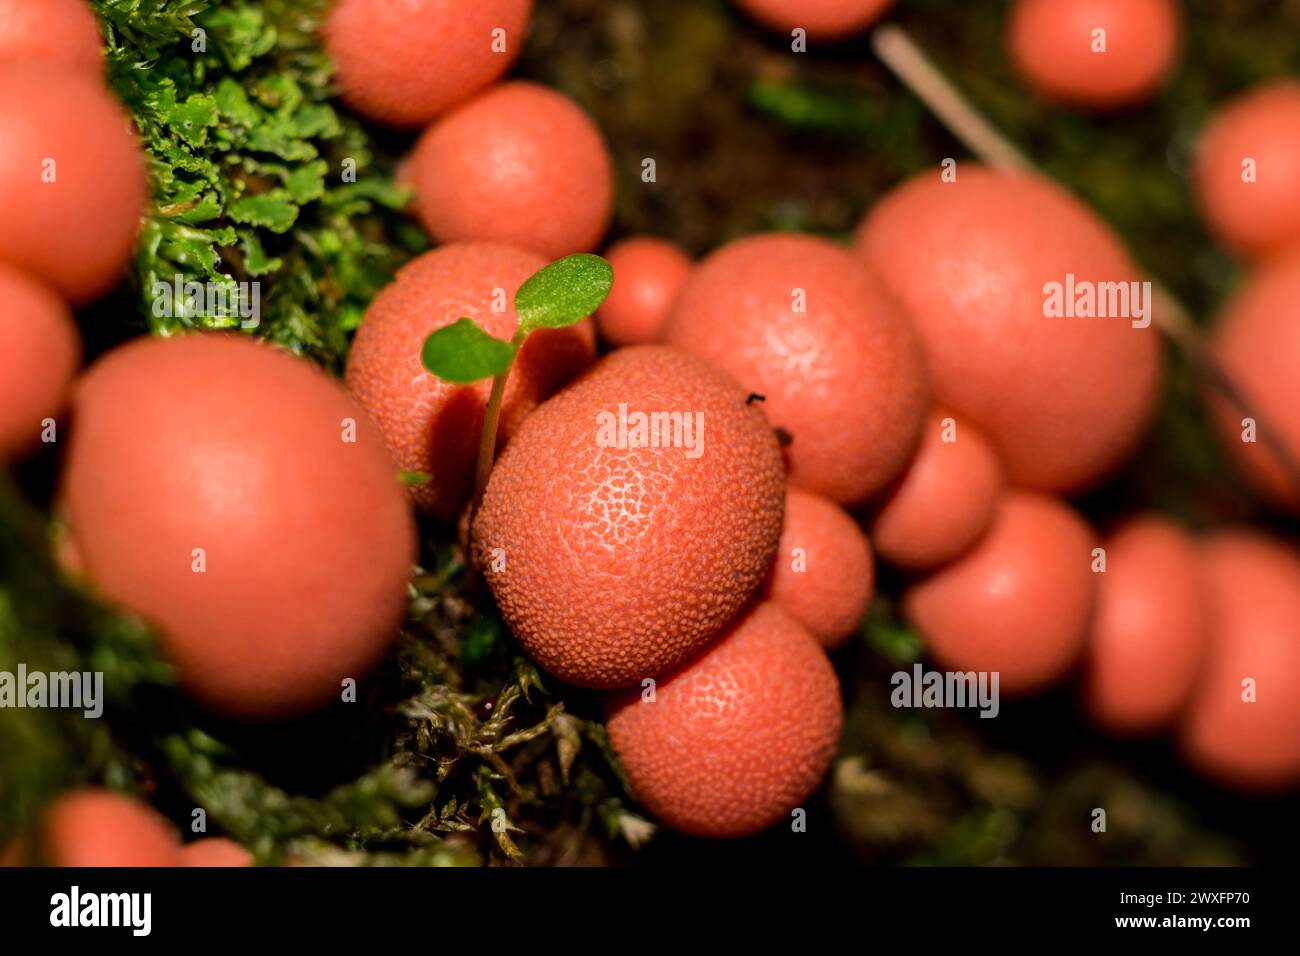 Lycogala epidendrum (wolf's milk, groening's slime) - A type of mold that lives on rotten stumps Stock Photo